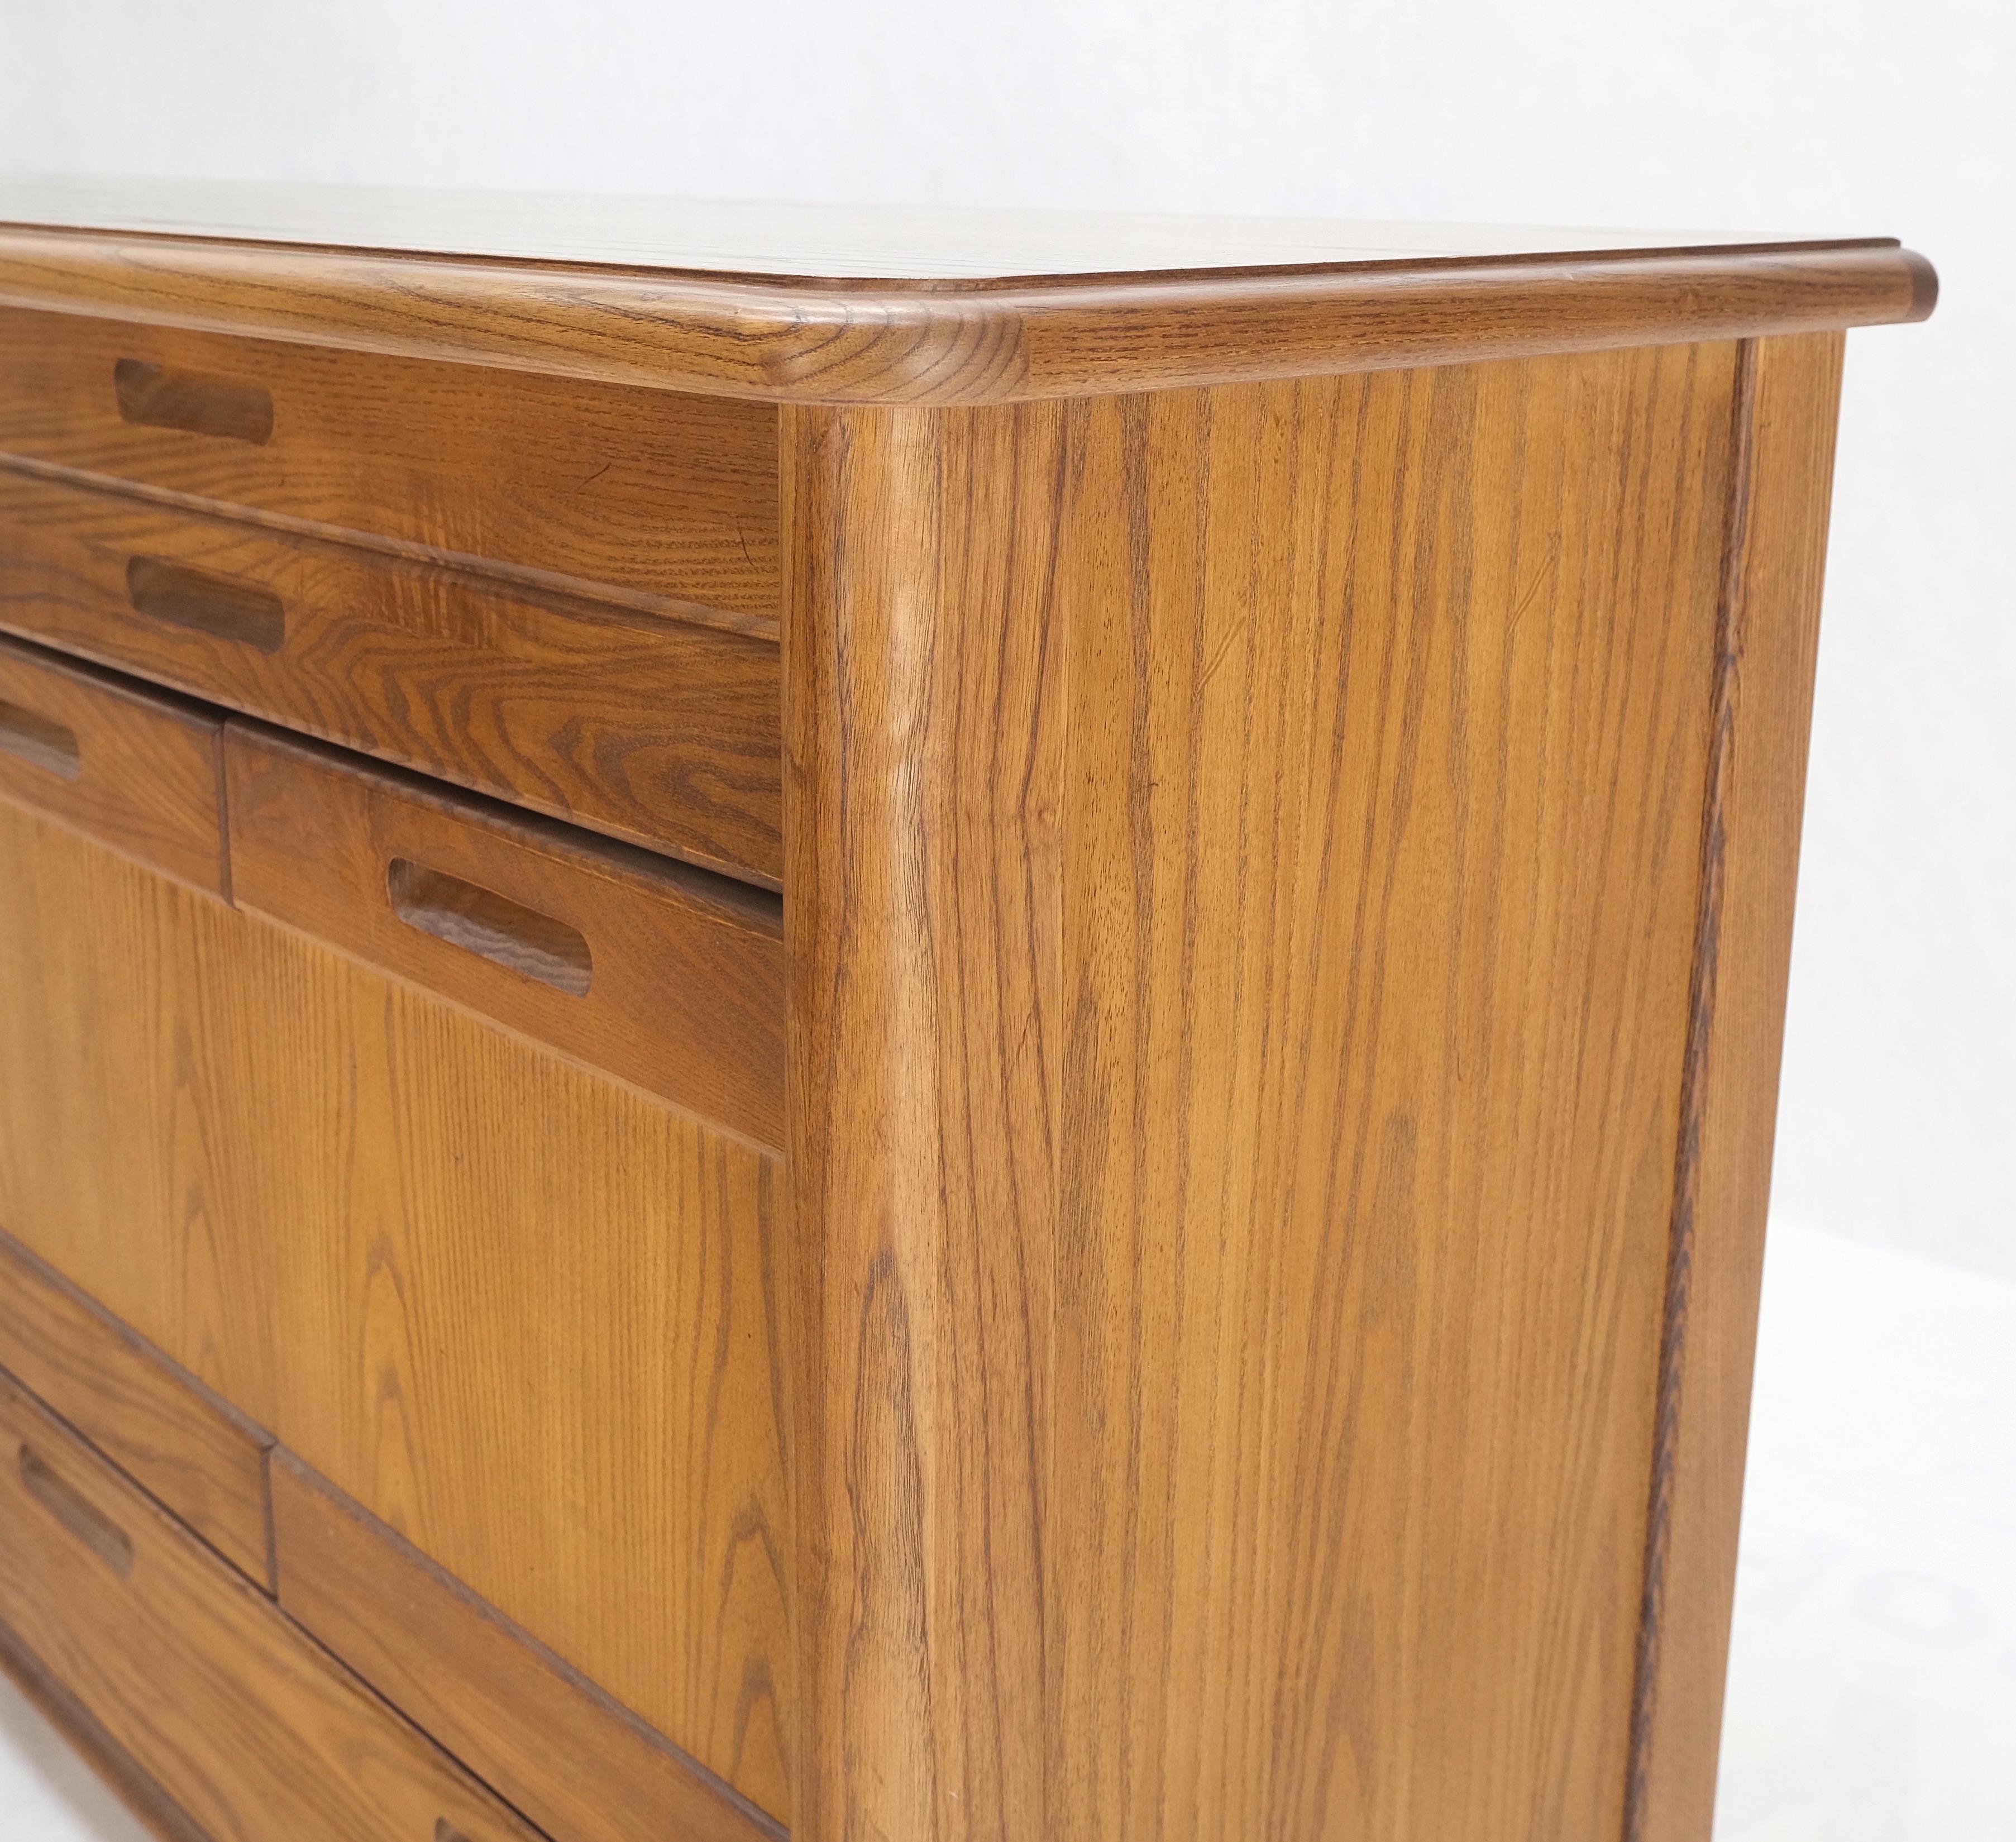 Lacquered Solid Oak Mid-Century Modern Credenza Server Two Door Compartments Cabinet Mint! For Sale